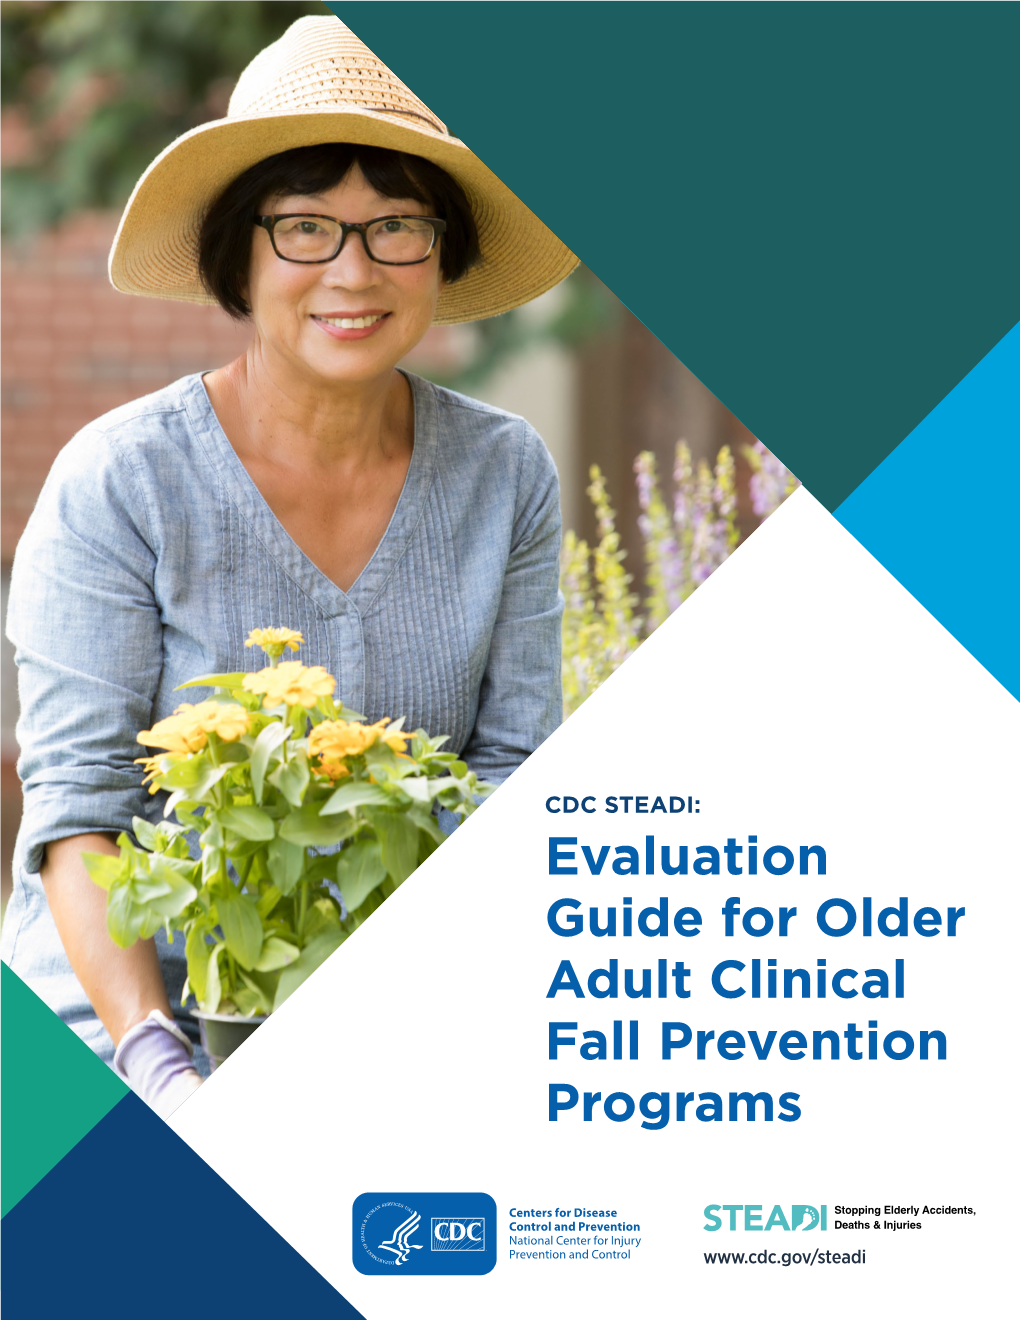 Evaluation Guide for Older Adult Clinical Fall Prevention Programs